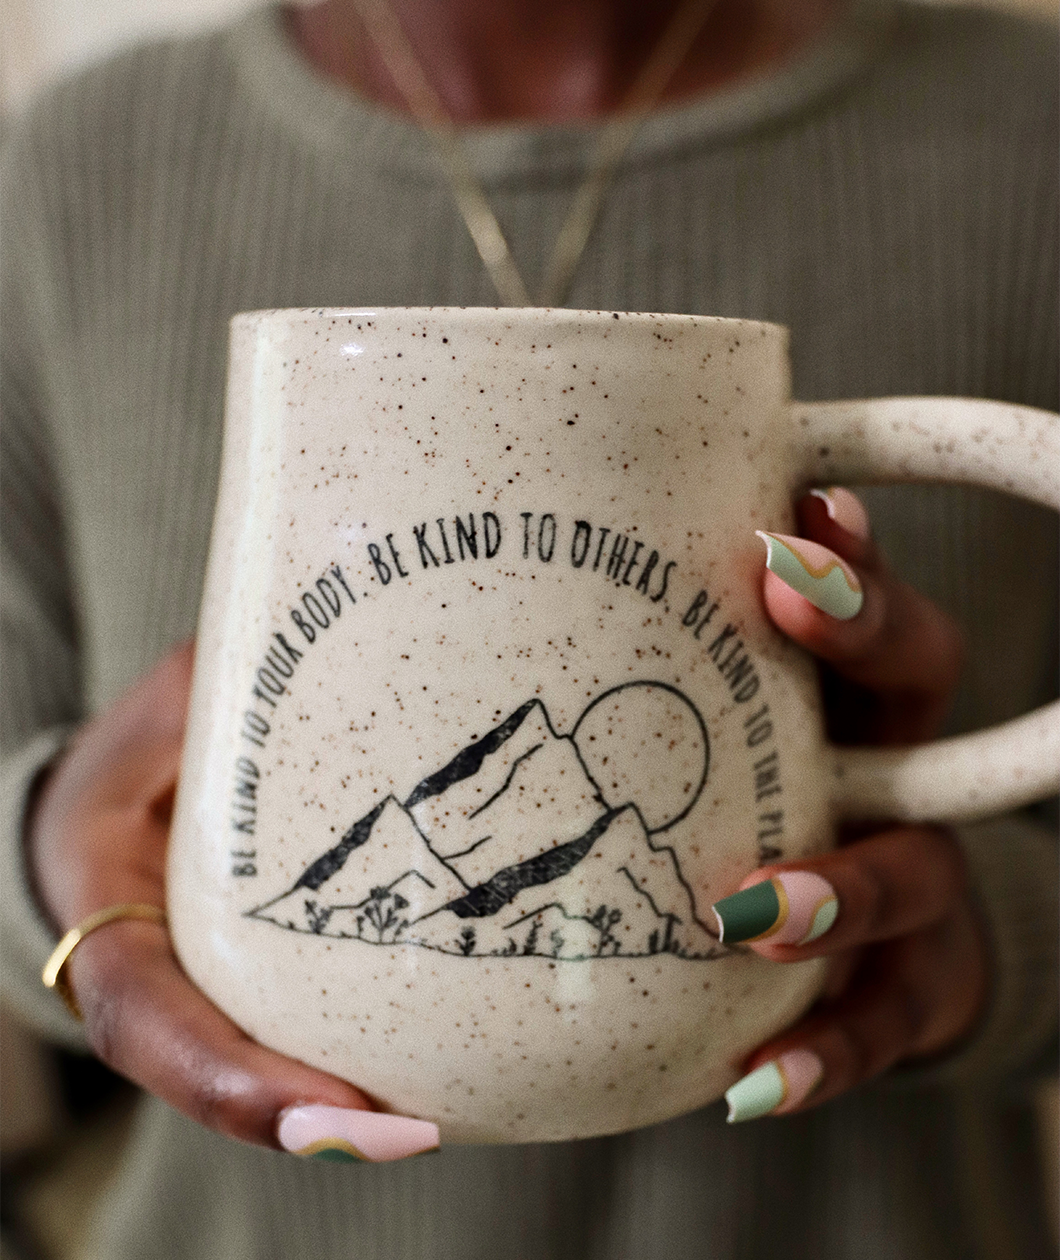 A close up of the Be Kind mug from Sierra Schultzzie in someones hands. The mug is speckled beige with mountains and a moon. The text curves around the mountains and says "Be kind to your body be kind to others be kind to the planet".